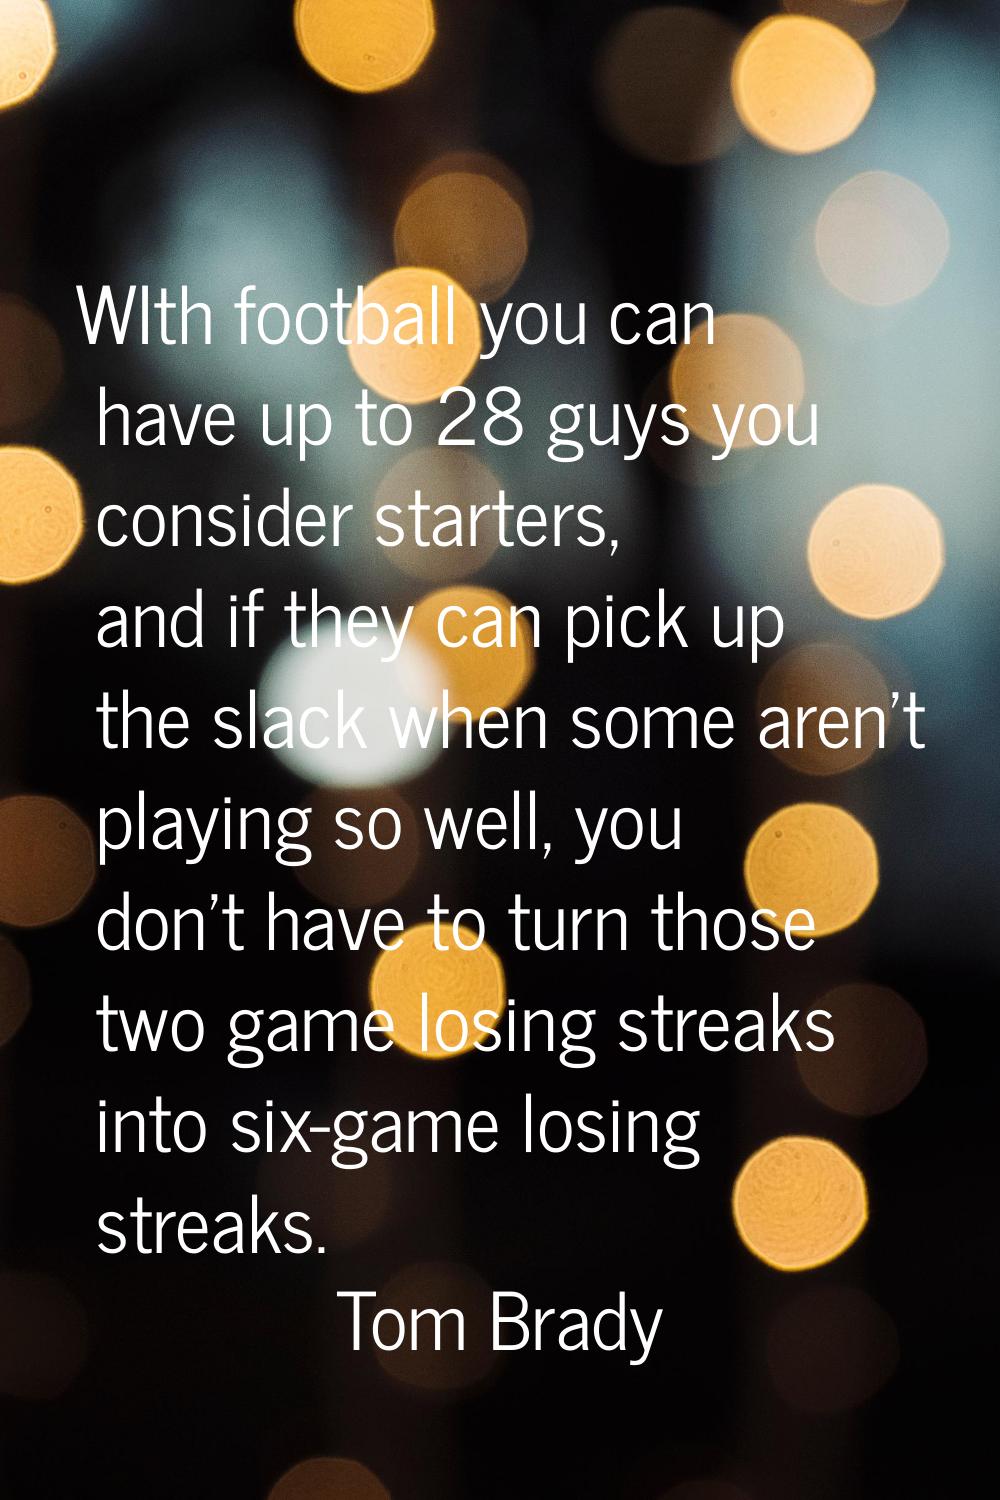 WIth football you can have up to 28 guys you consider starters, and if they can pick up the slack w